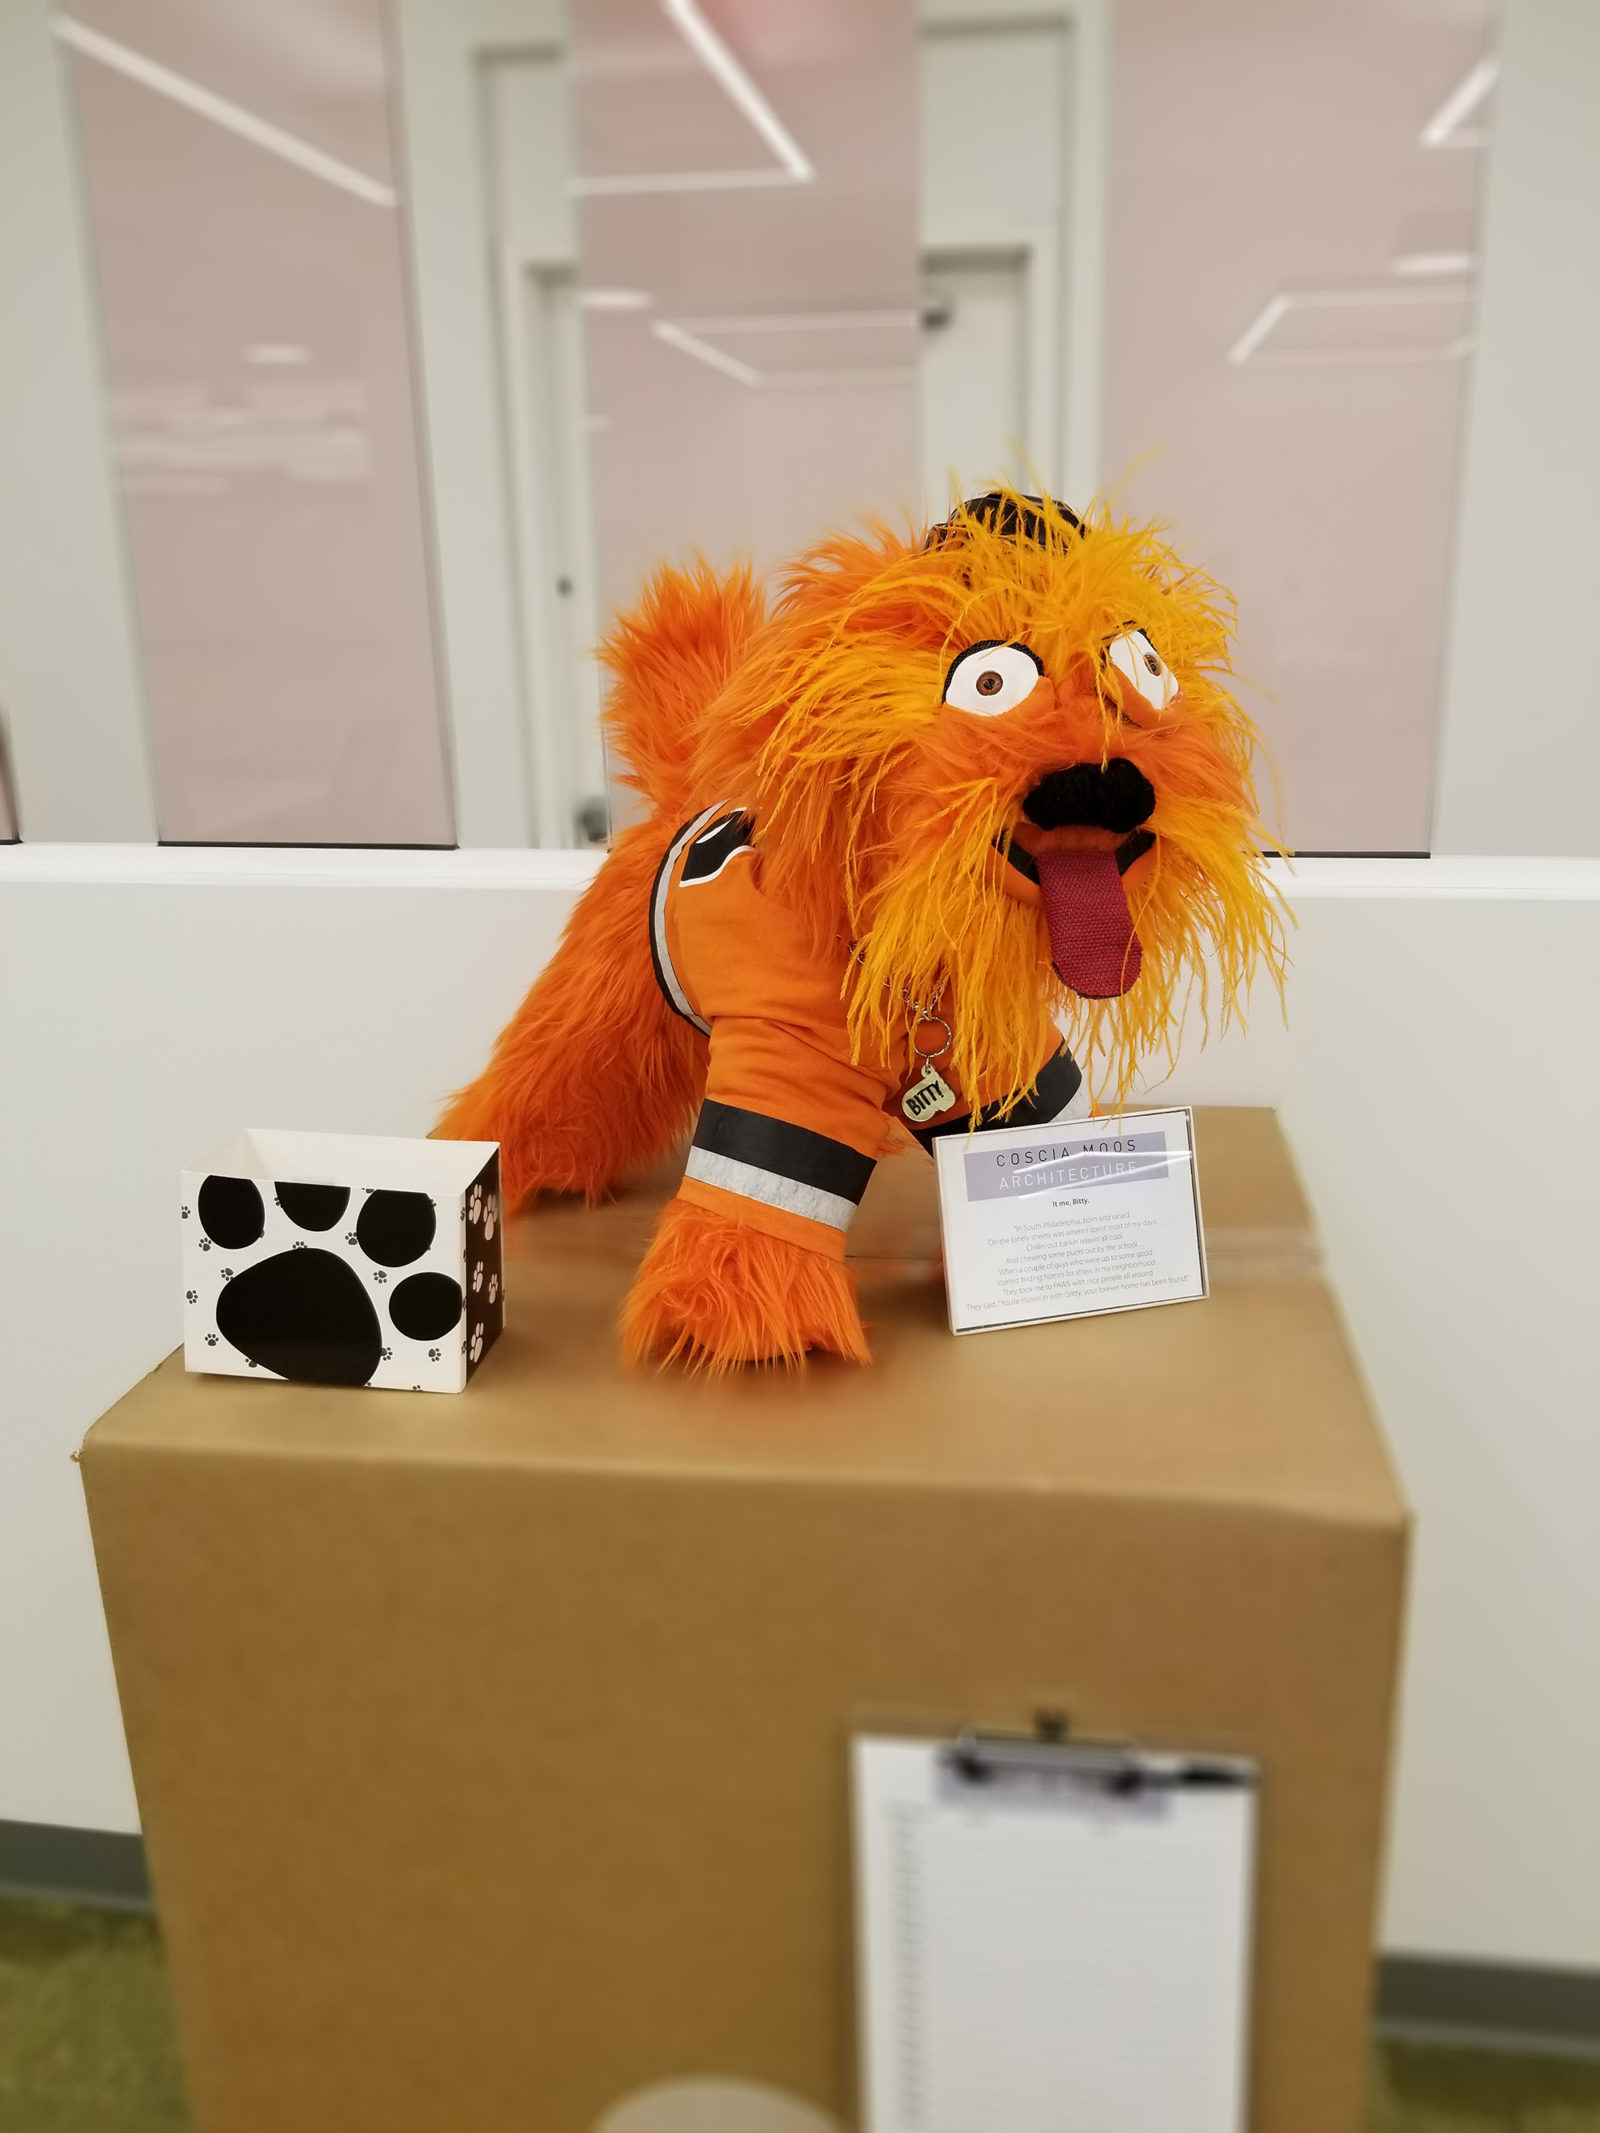 Dog statue decorated to look like Gritty, the Philadelphia Flyer's mascot. Bright orange fur with big, crazy eyes, wearing a Flyers jersey.